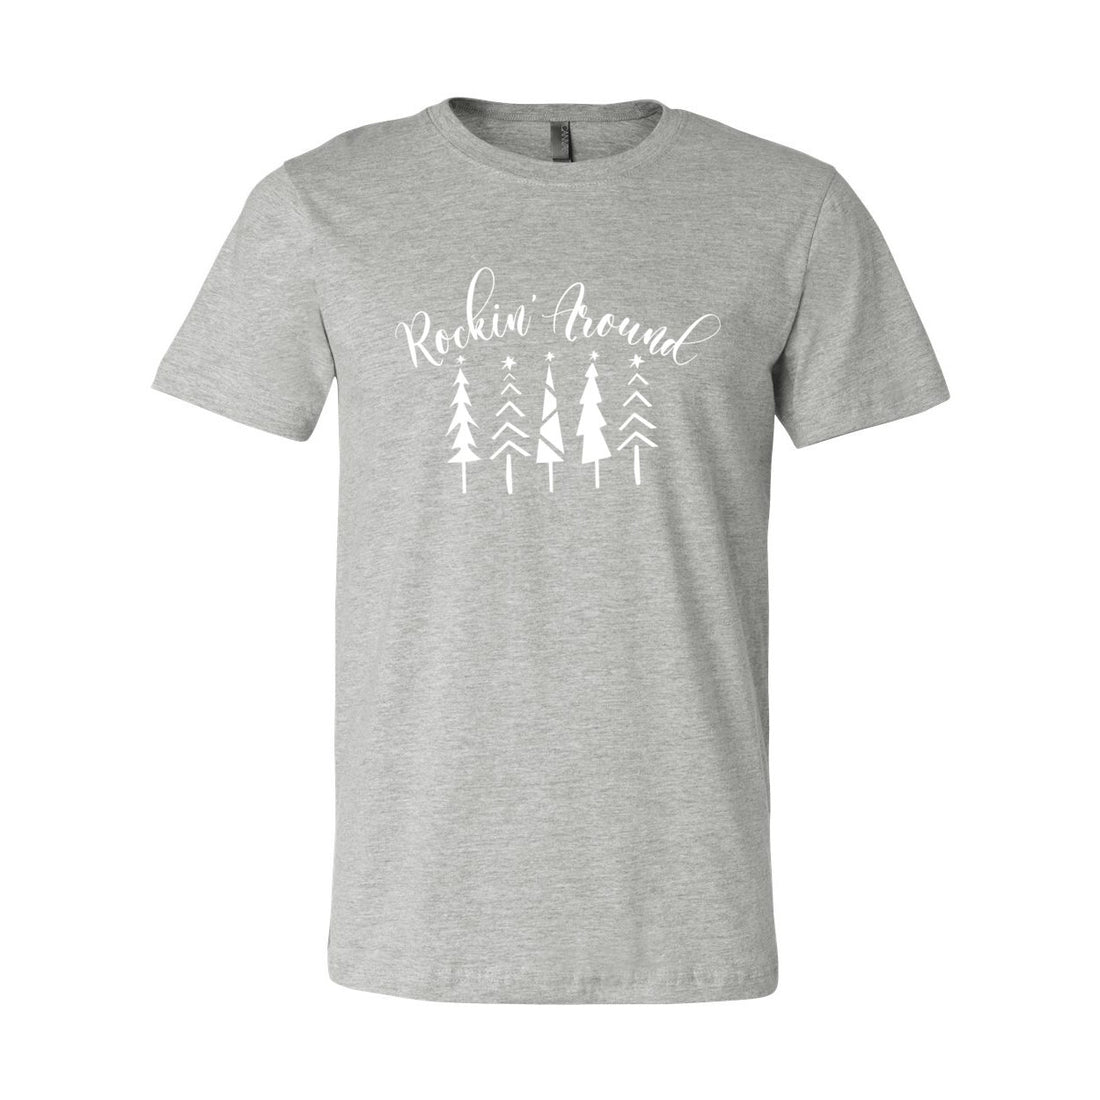 Rockin' Around The Tree - T-Shirts - Positively Sassy - Rockin' Around The Tree